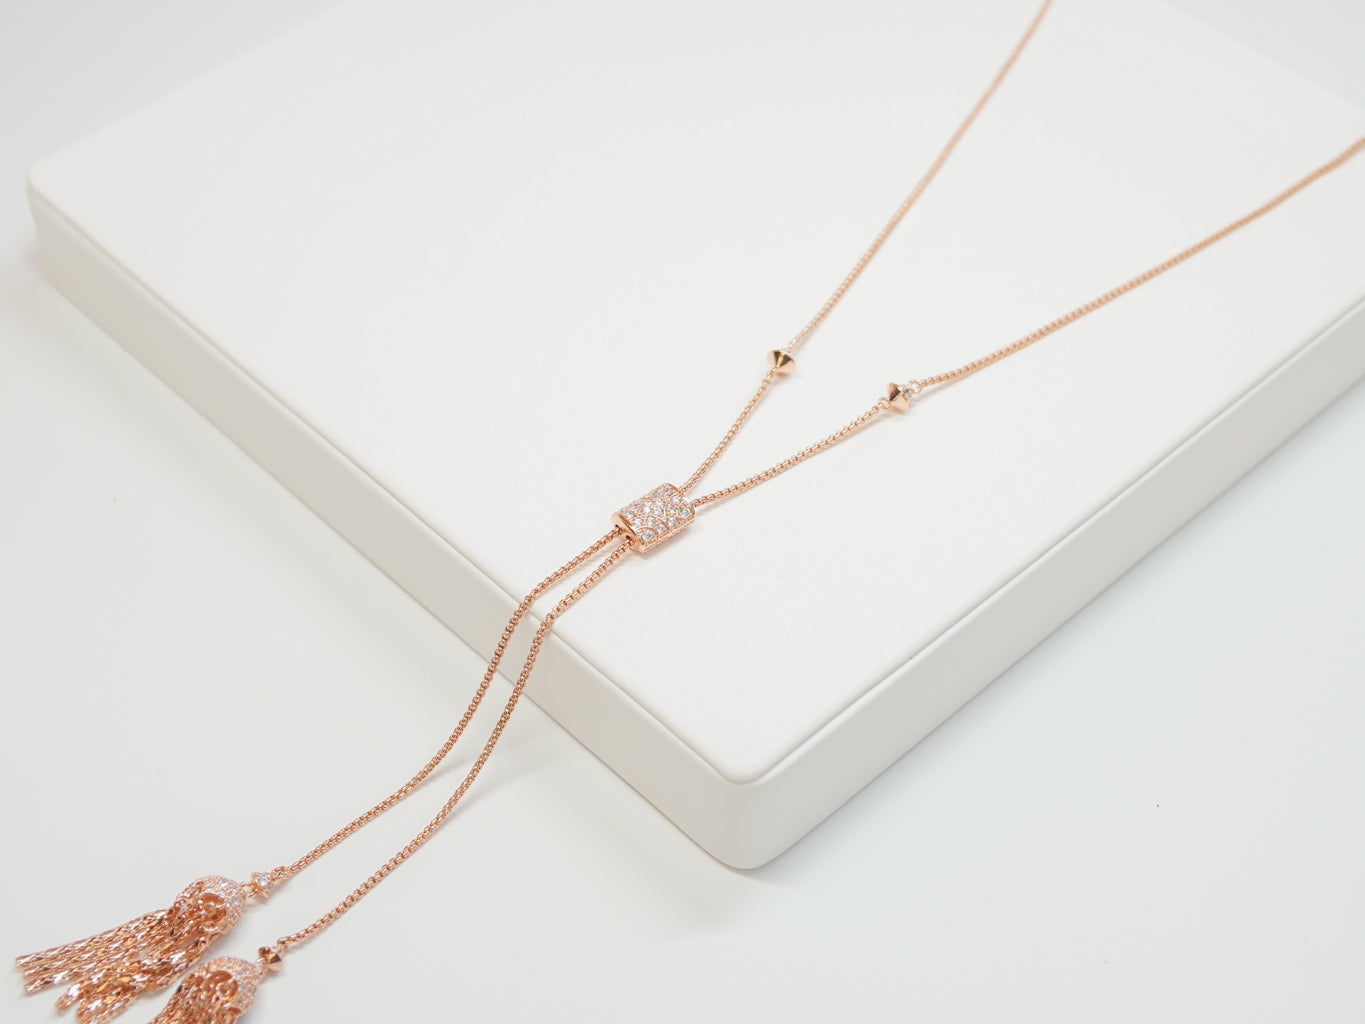 Lily necklace